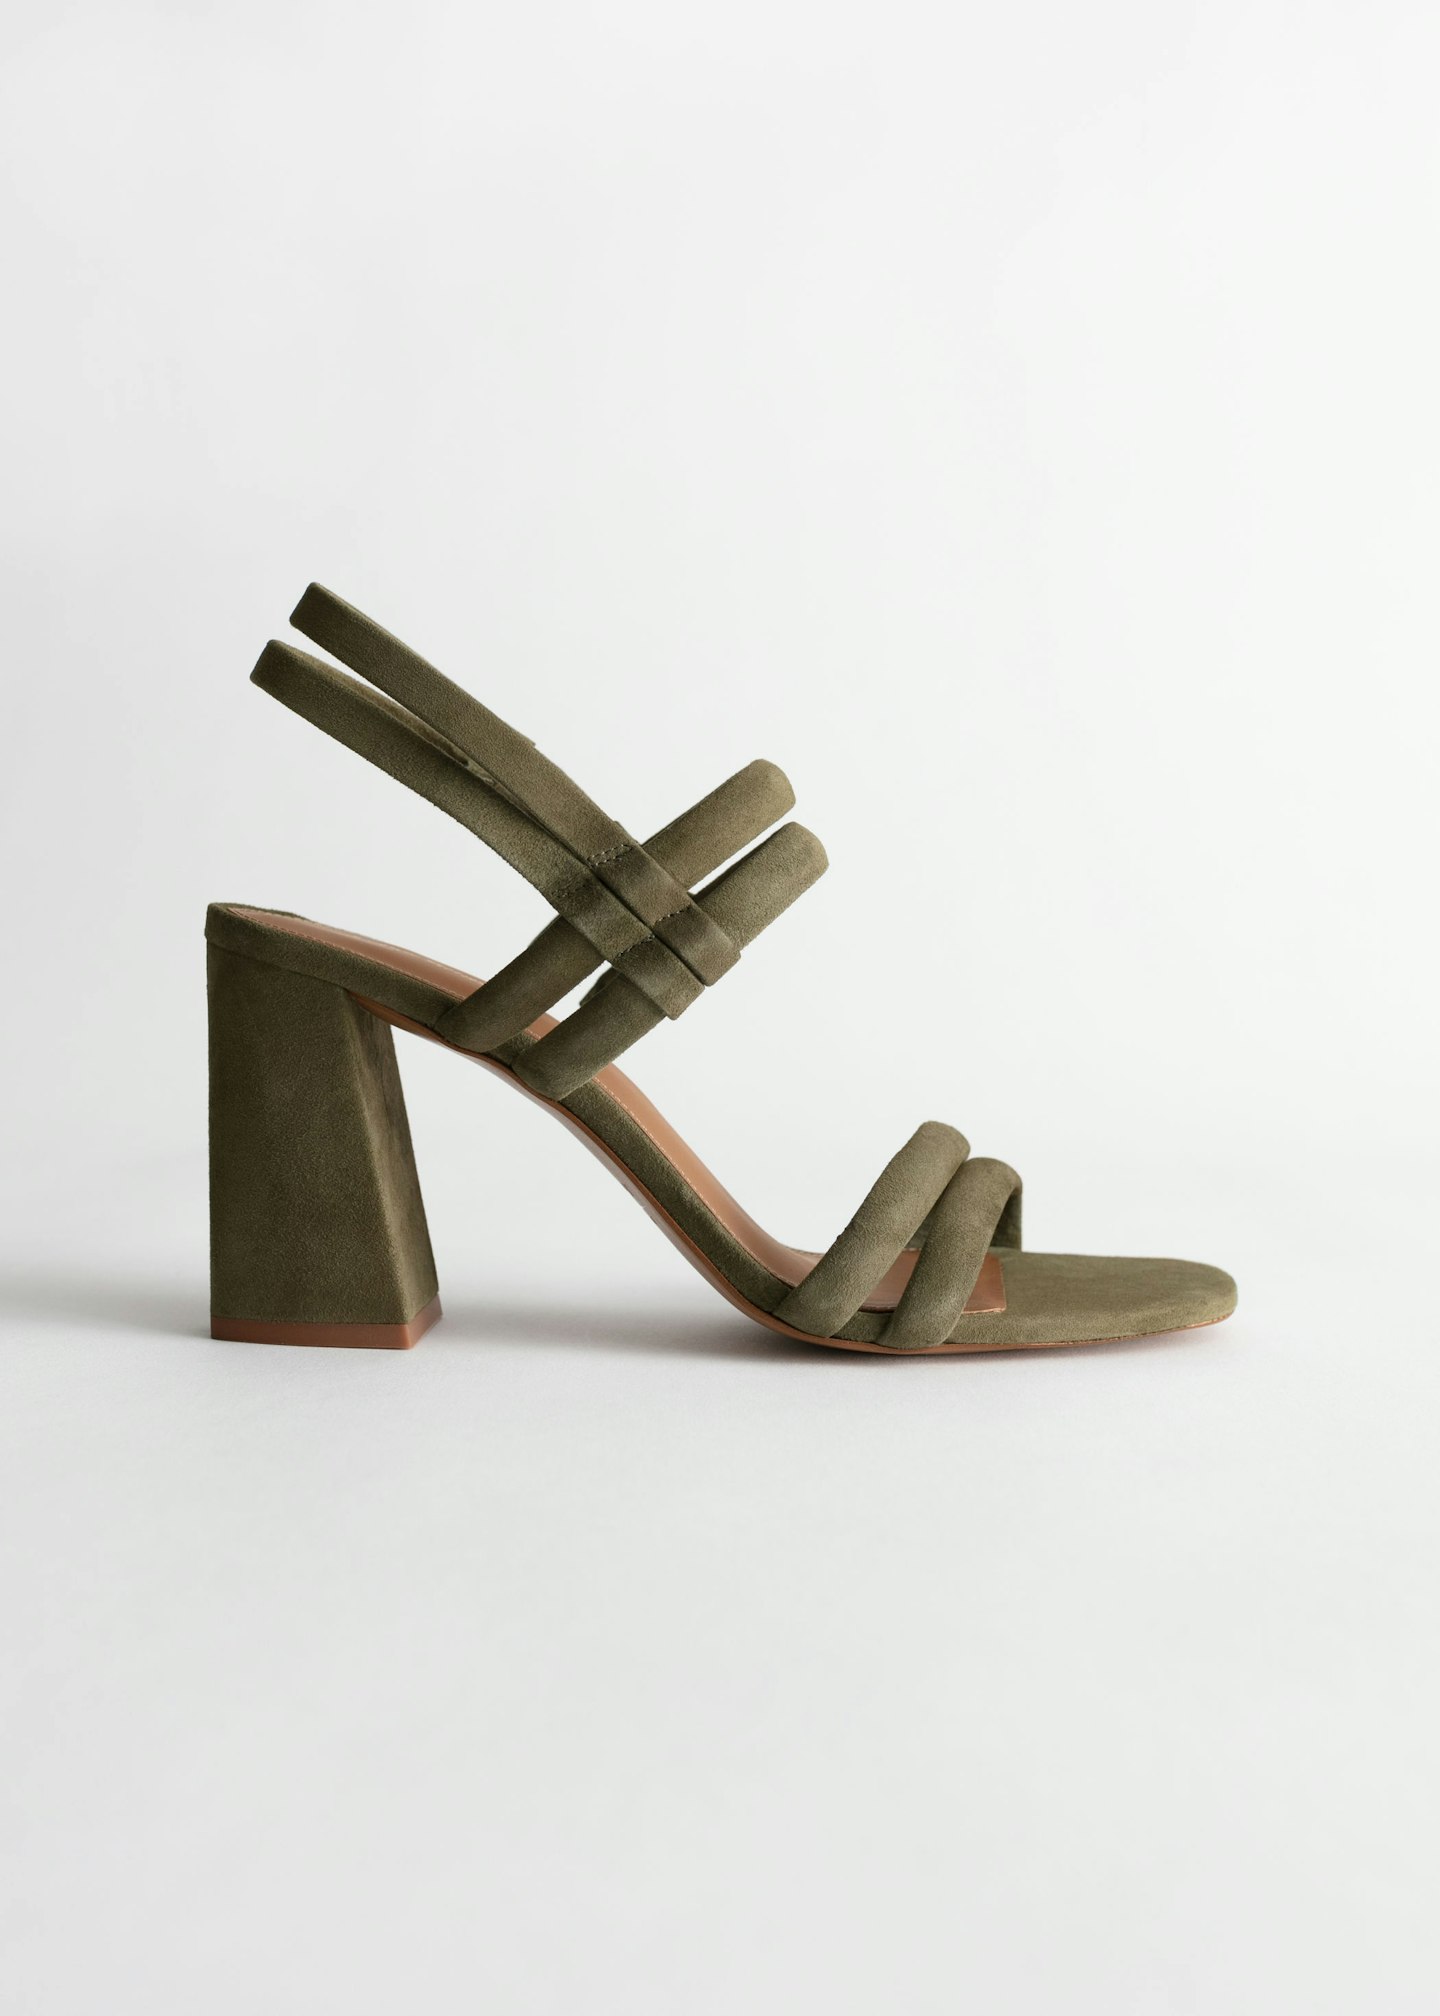 & Other Stories, Suede Slingback Heeled Sandals, £85